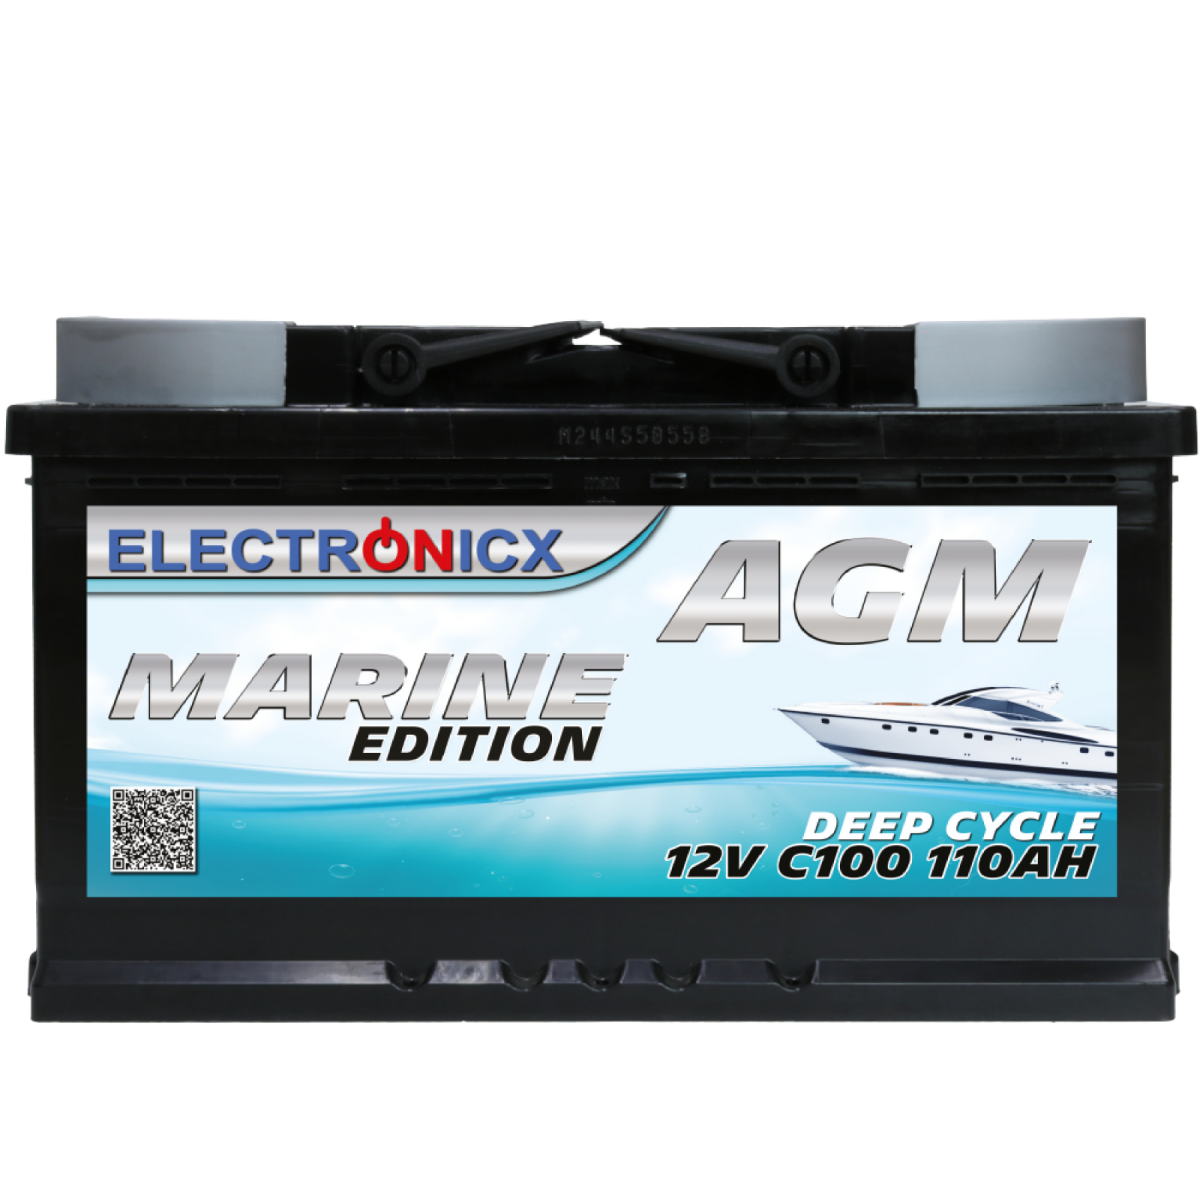 agm battery 110ah Electronicx marine edition boat ship supply battery 12v battery deep boat battery car battery solar battery solar batteries..